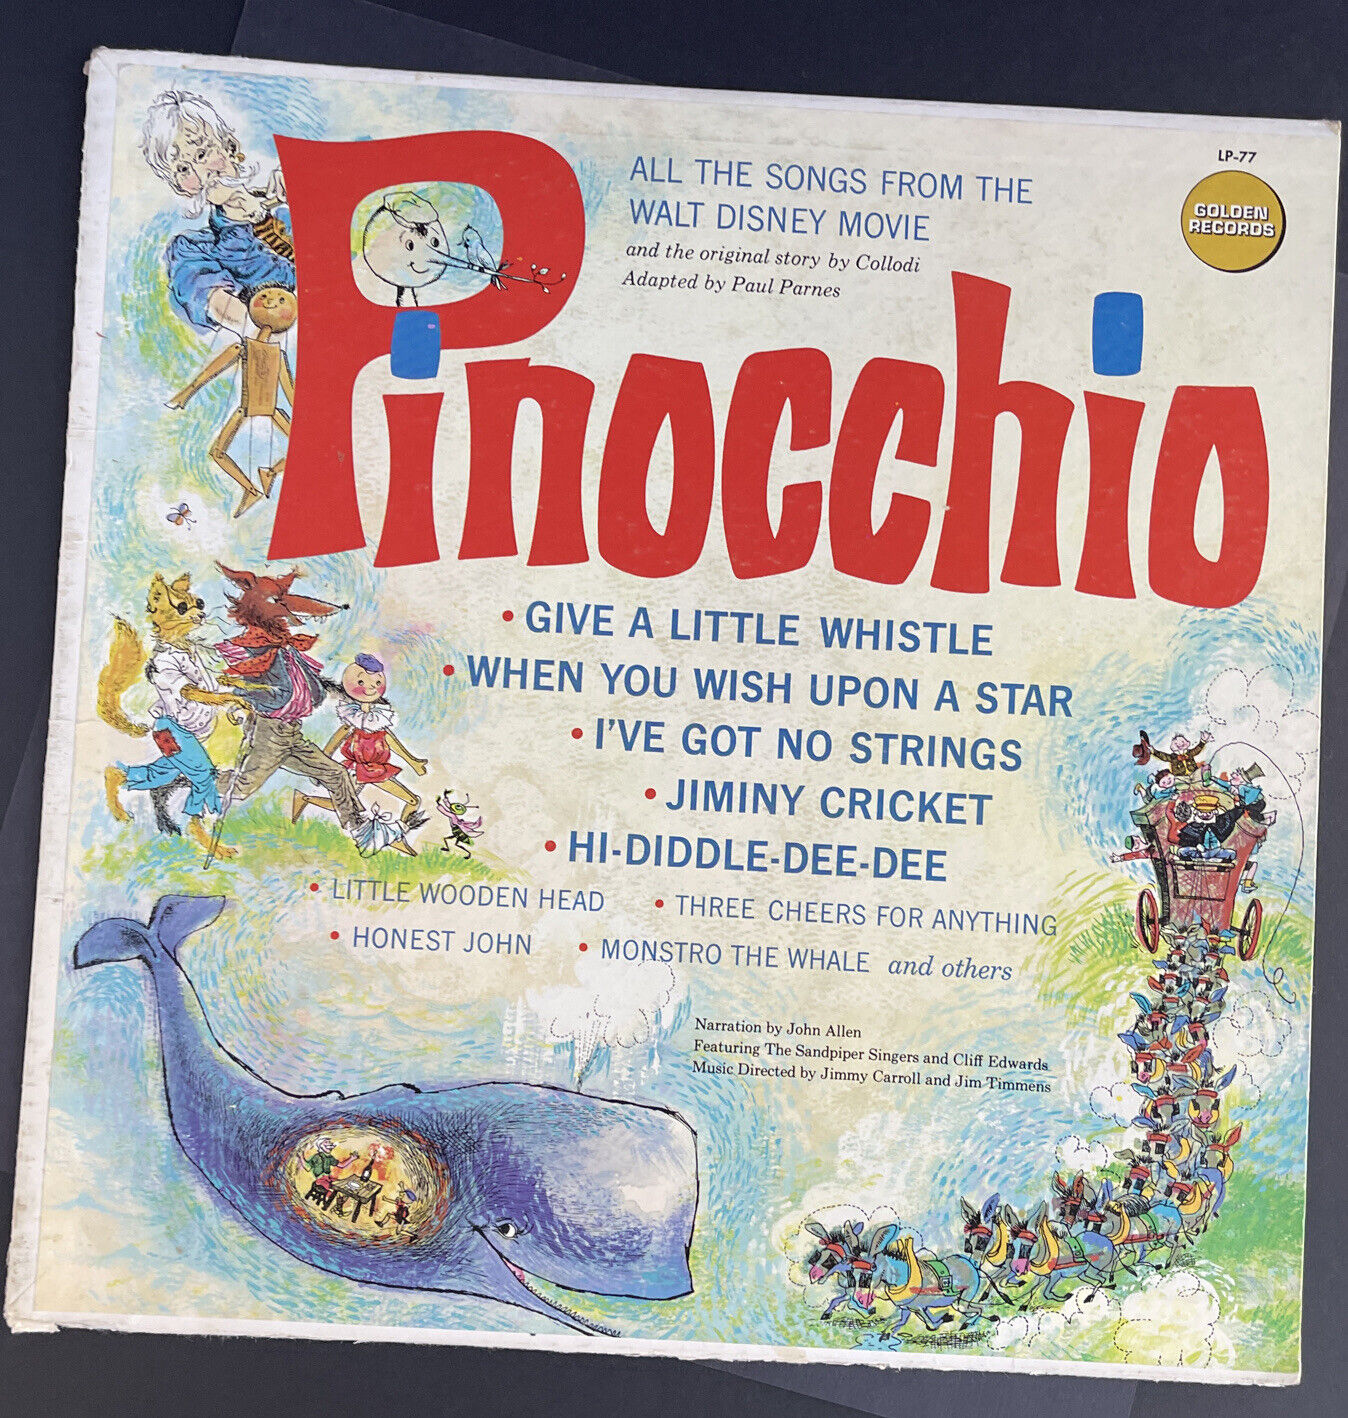 Vintage Disney’s PINOCCHIO 1962 All The Songs From The Walt Disney Movie